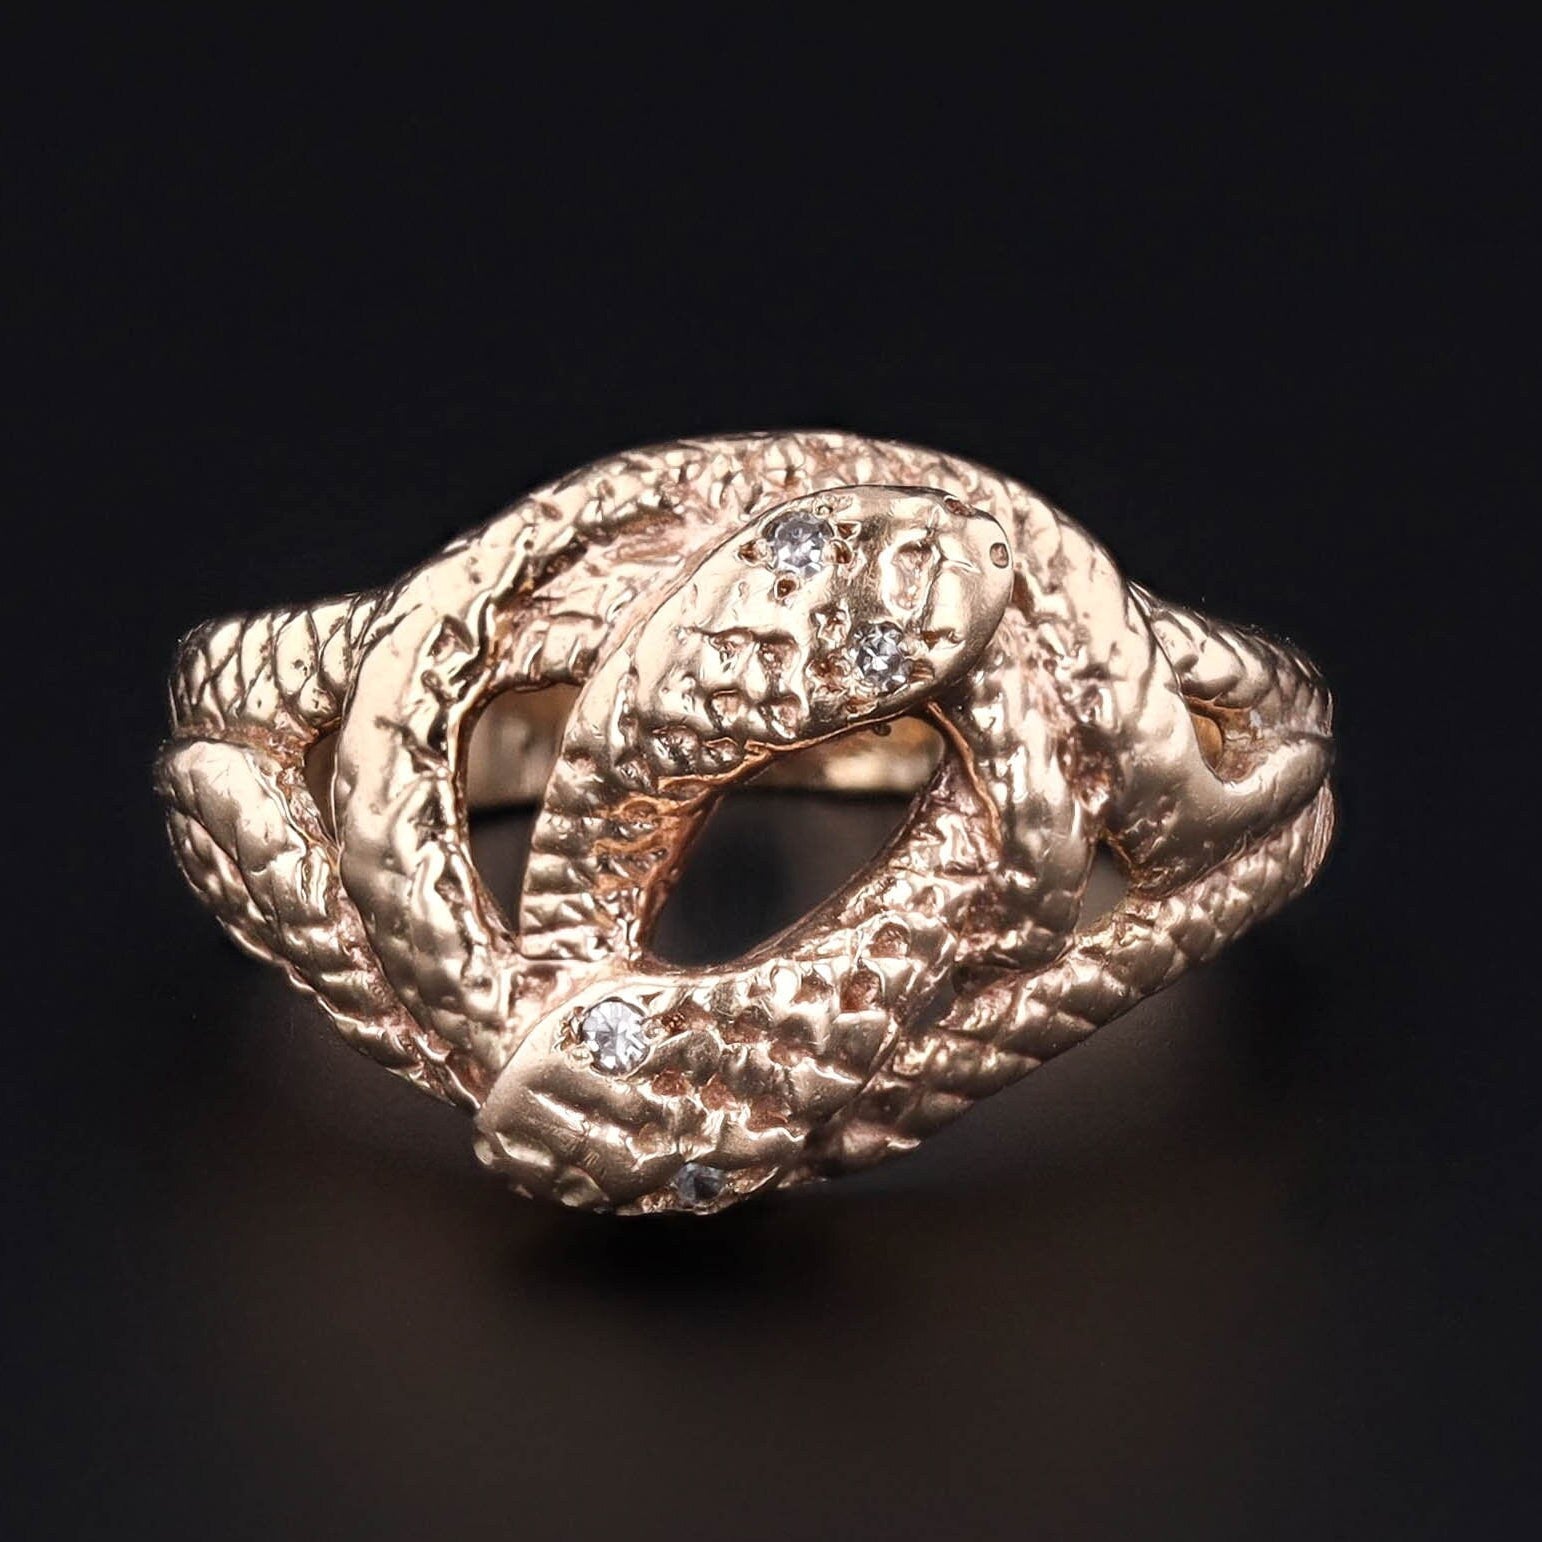 Entwined Snakes Ring | 10k Gold Snake Ring 